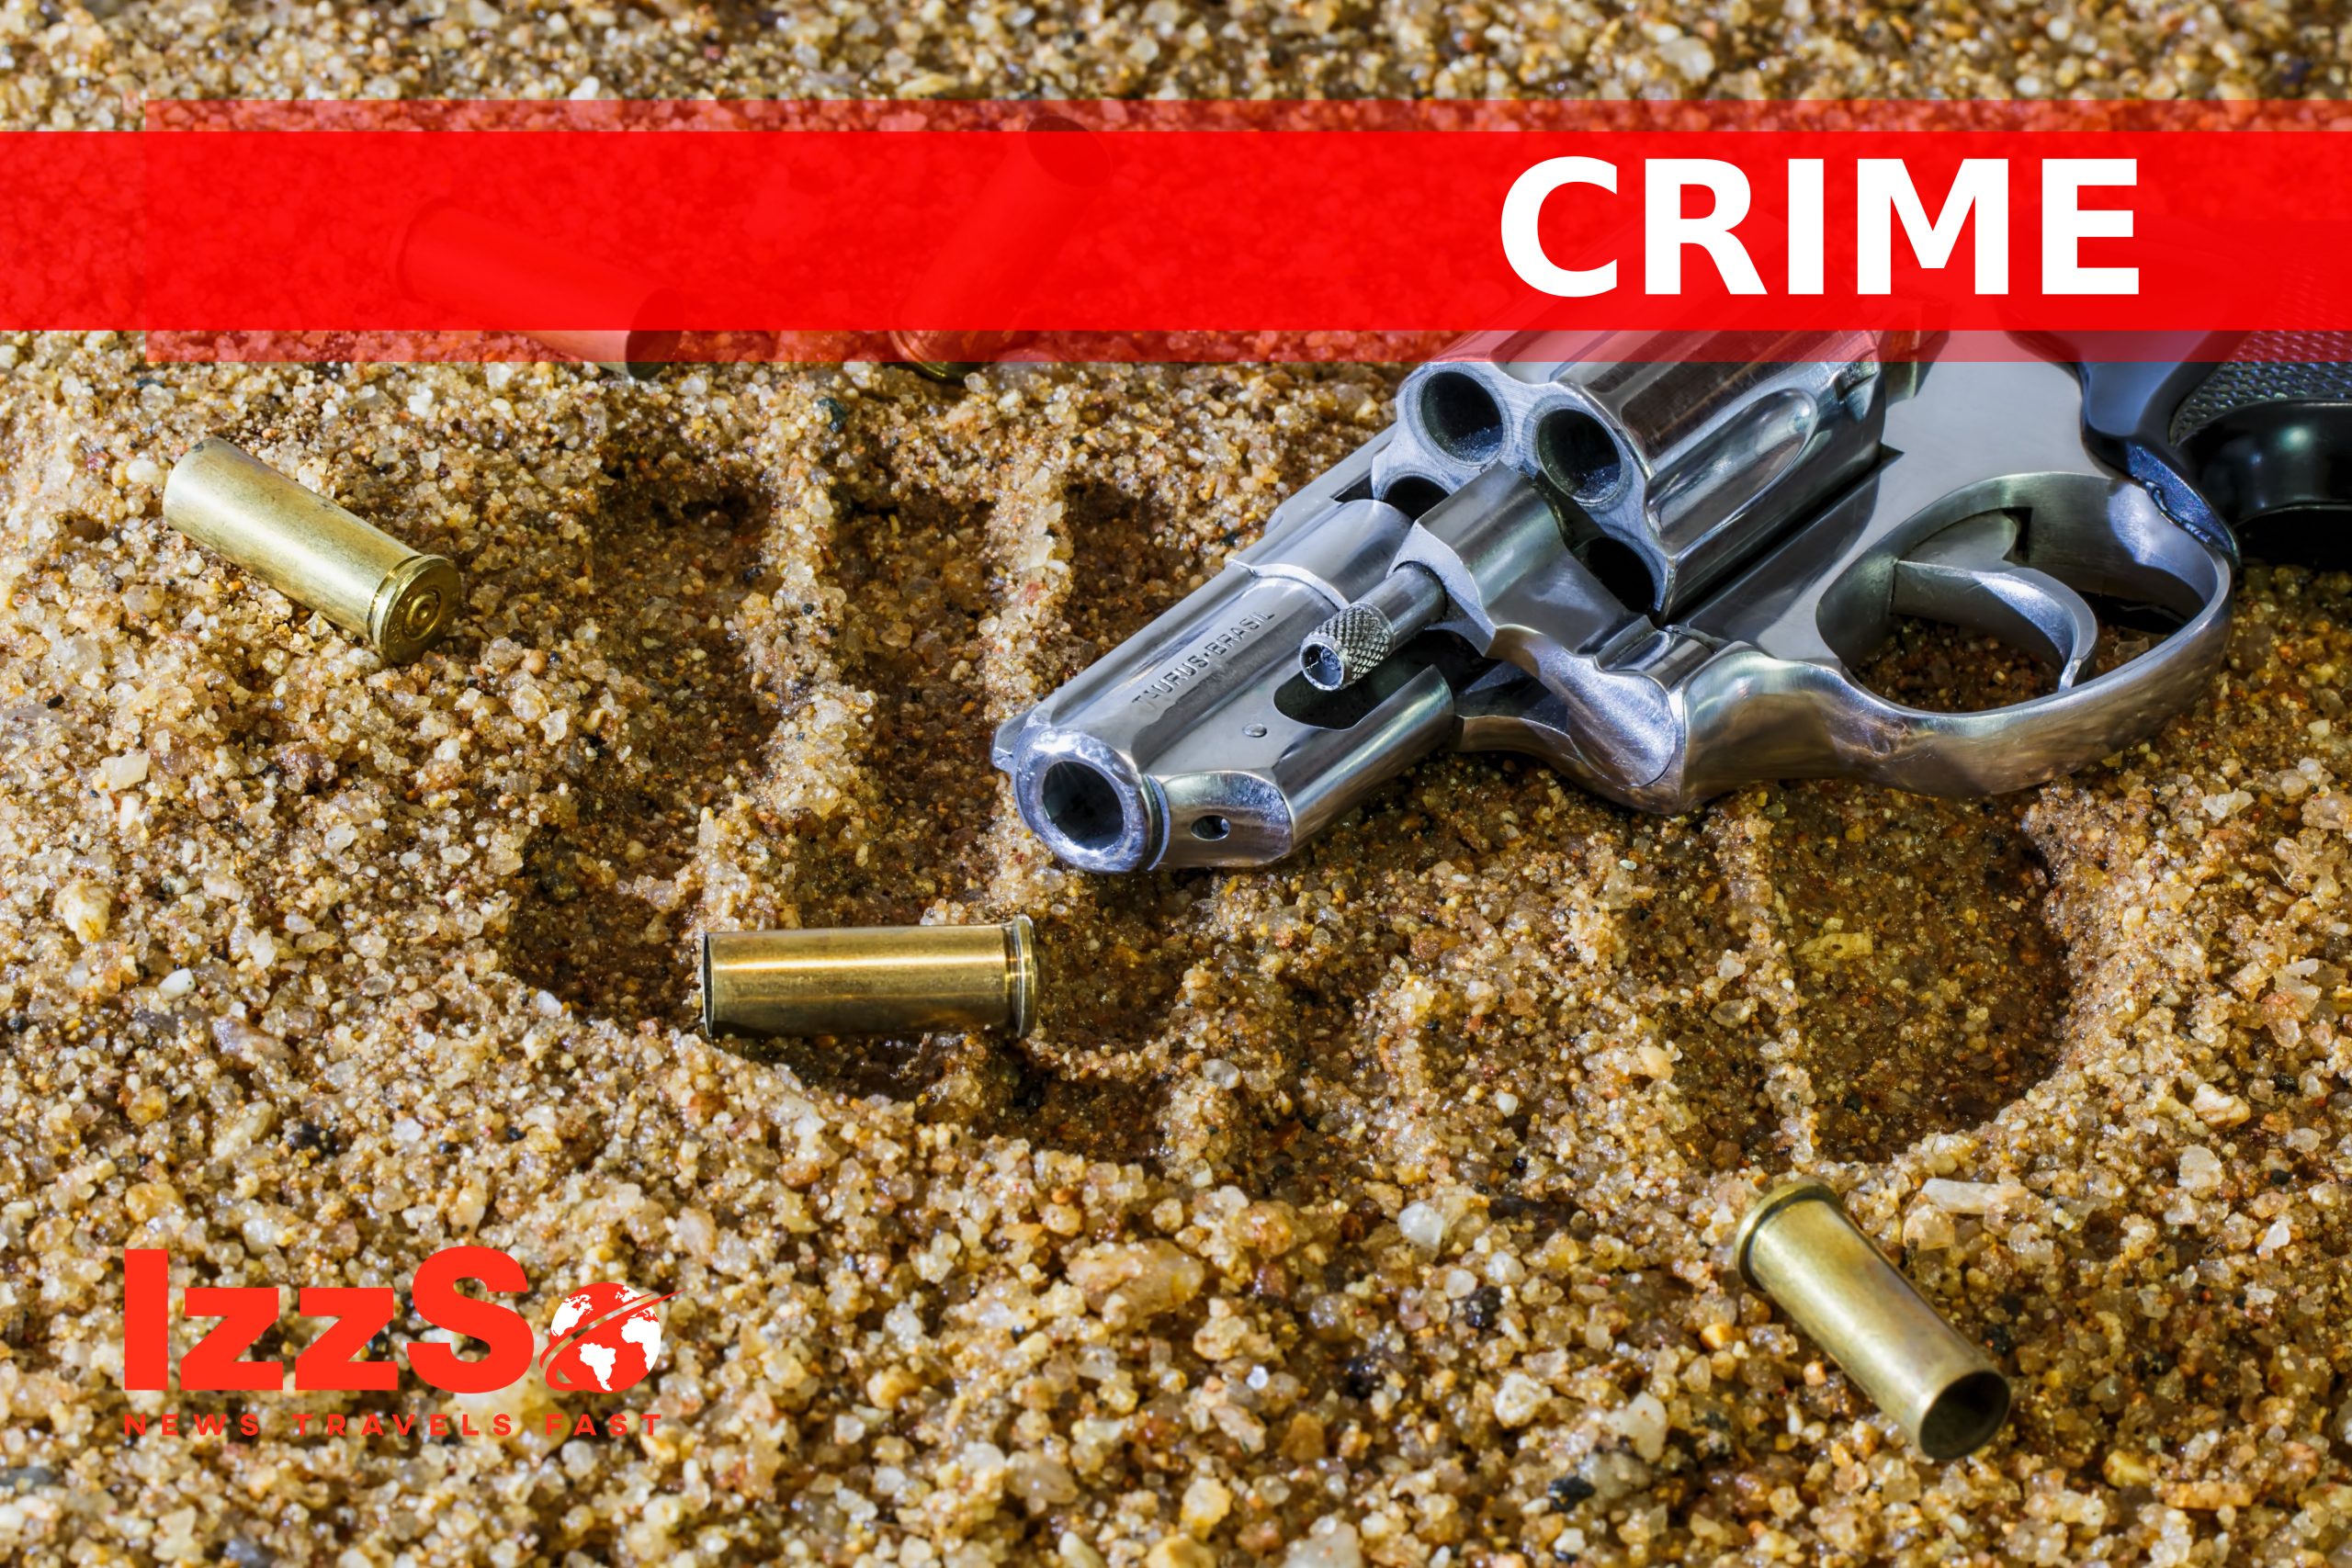 3 men arrested as police and residents team up to remove 2 guns, ammunition in POS